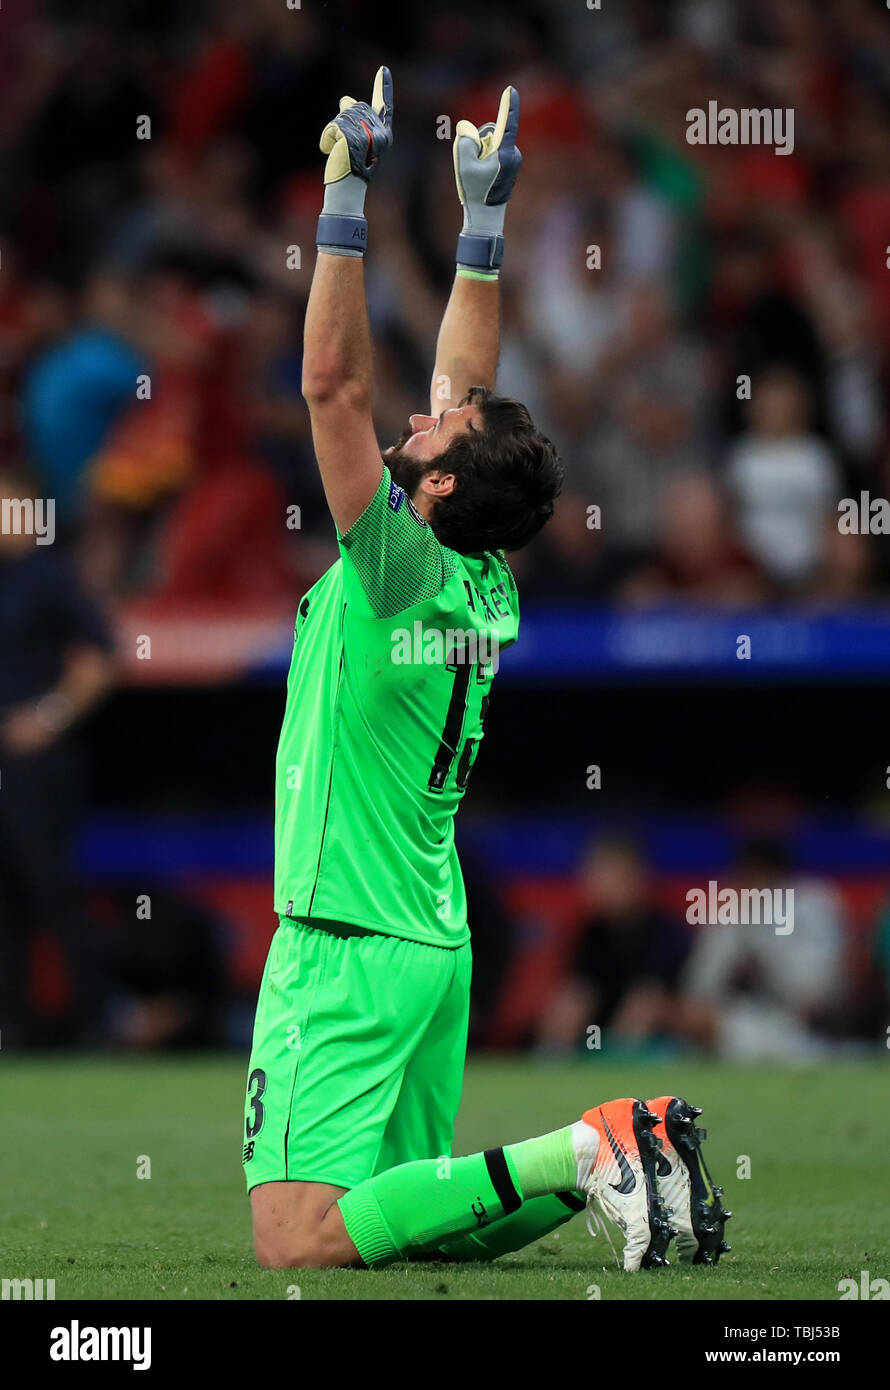 Alisson Becker Leads Brazil Into World Cup Quarter-Finals - The